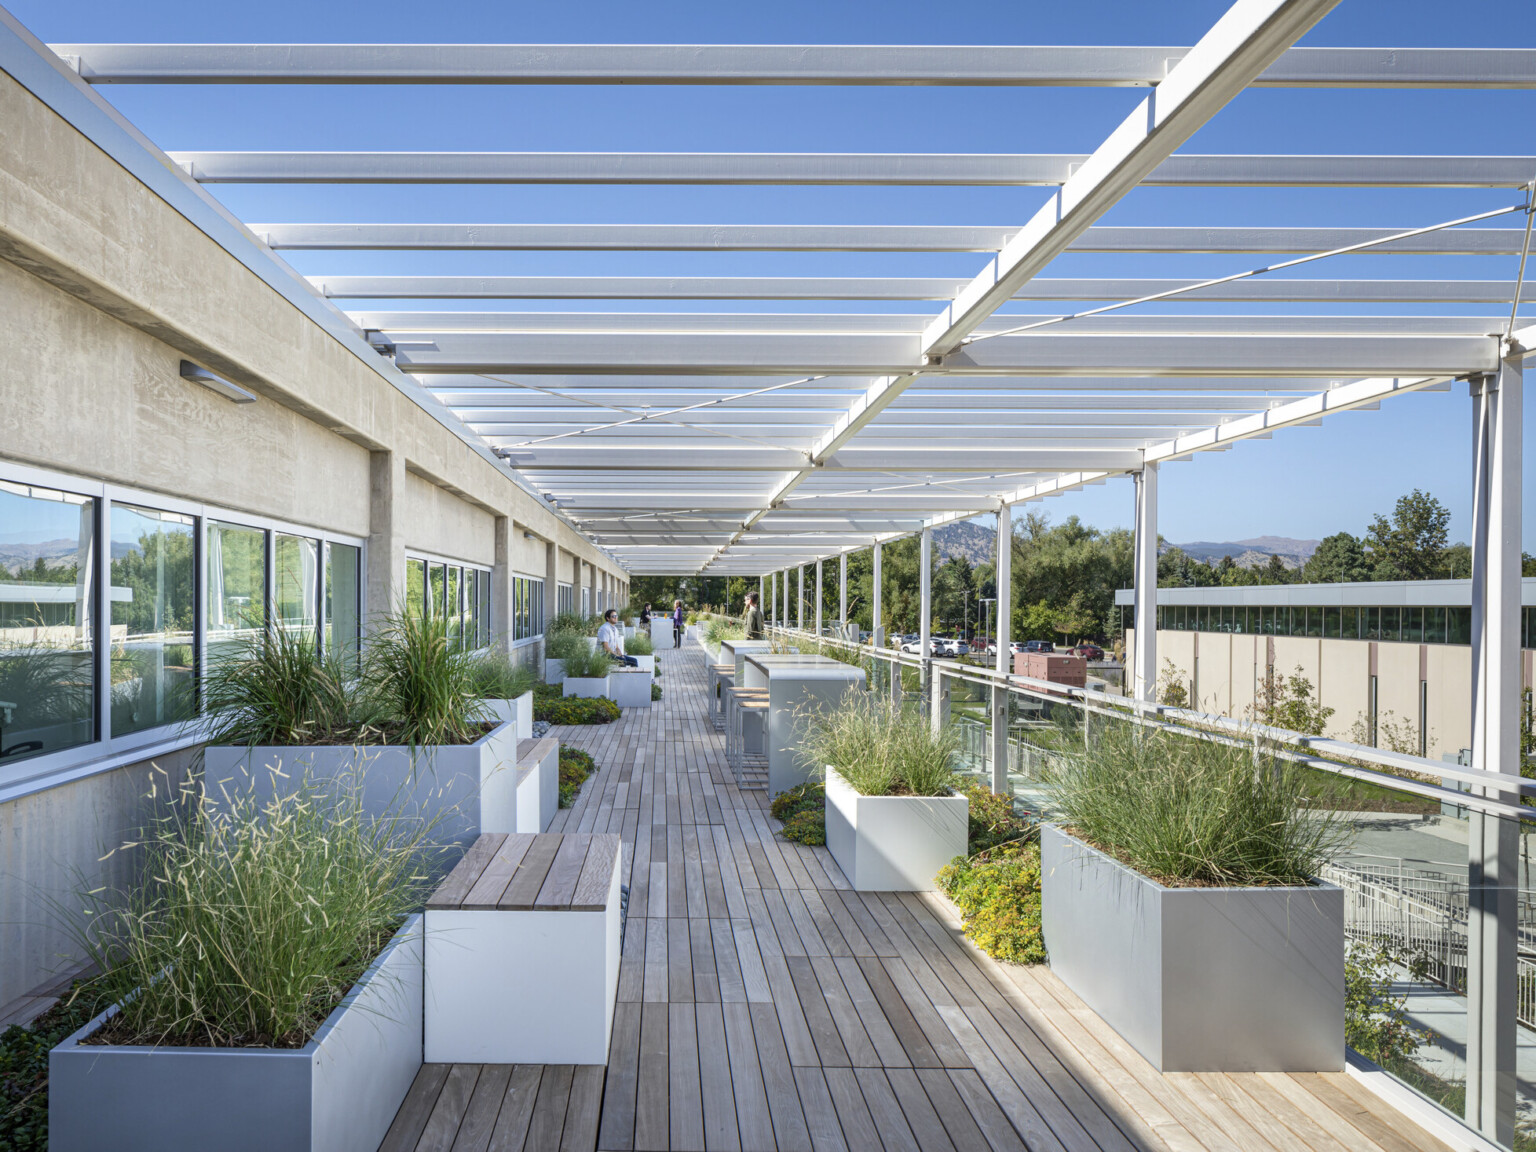 Outdoor walkway filled with plants in white planters on wooden decking